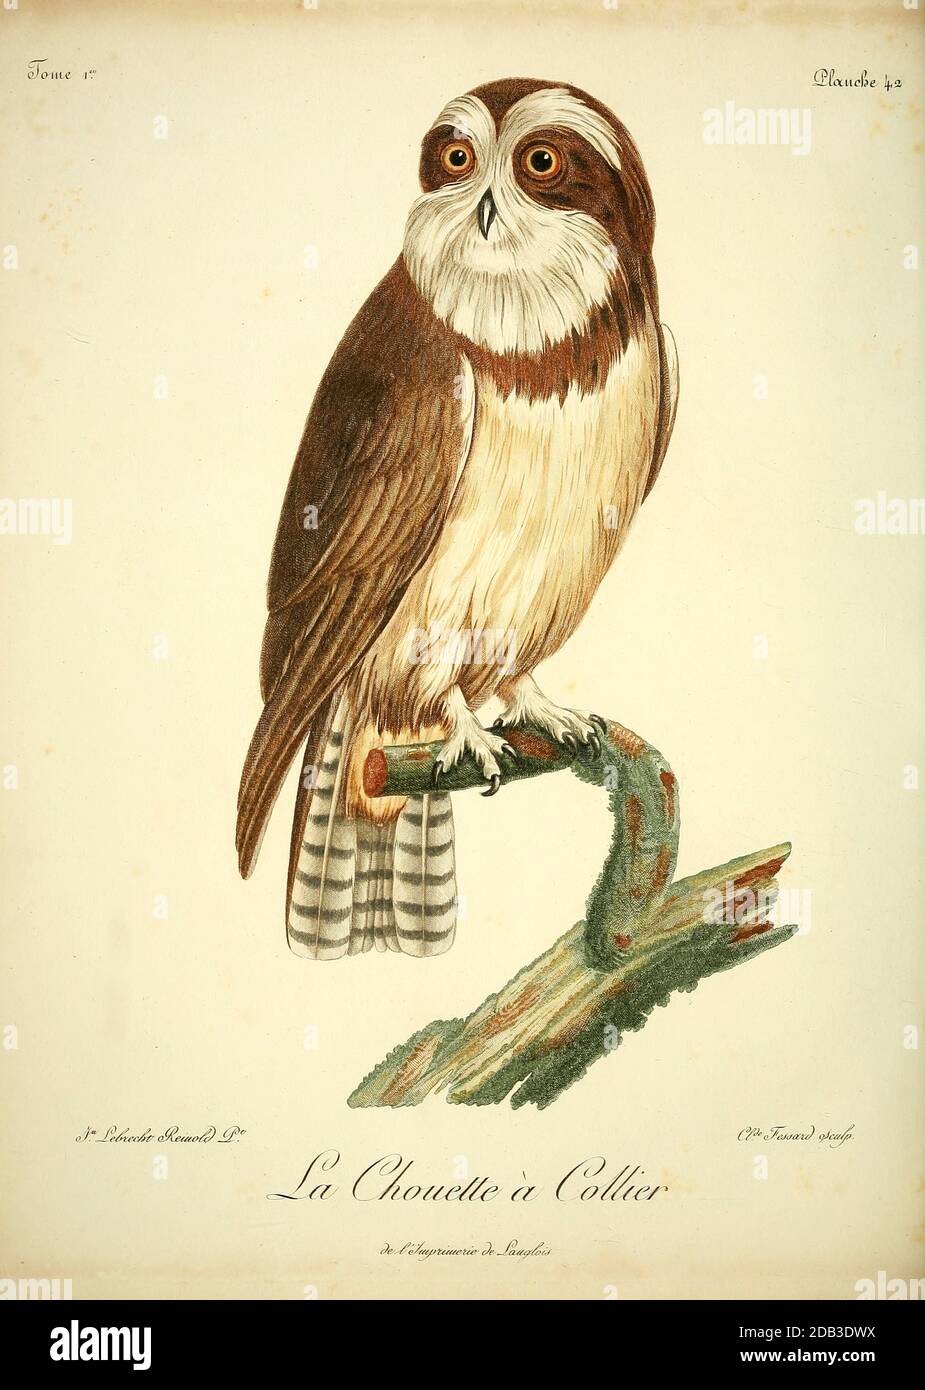 Chouette à collier - The band-bellied owl (Pulsatrix melanota) is a species  of owl in the family Strigidae. Bird of Prey from the Book Histoire  naturelle des oiseaux d'Afrique [Natural History of